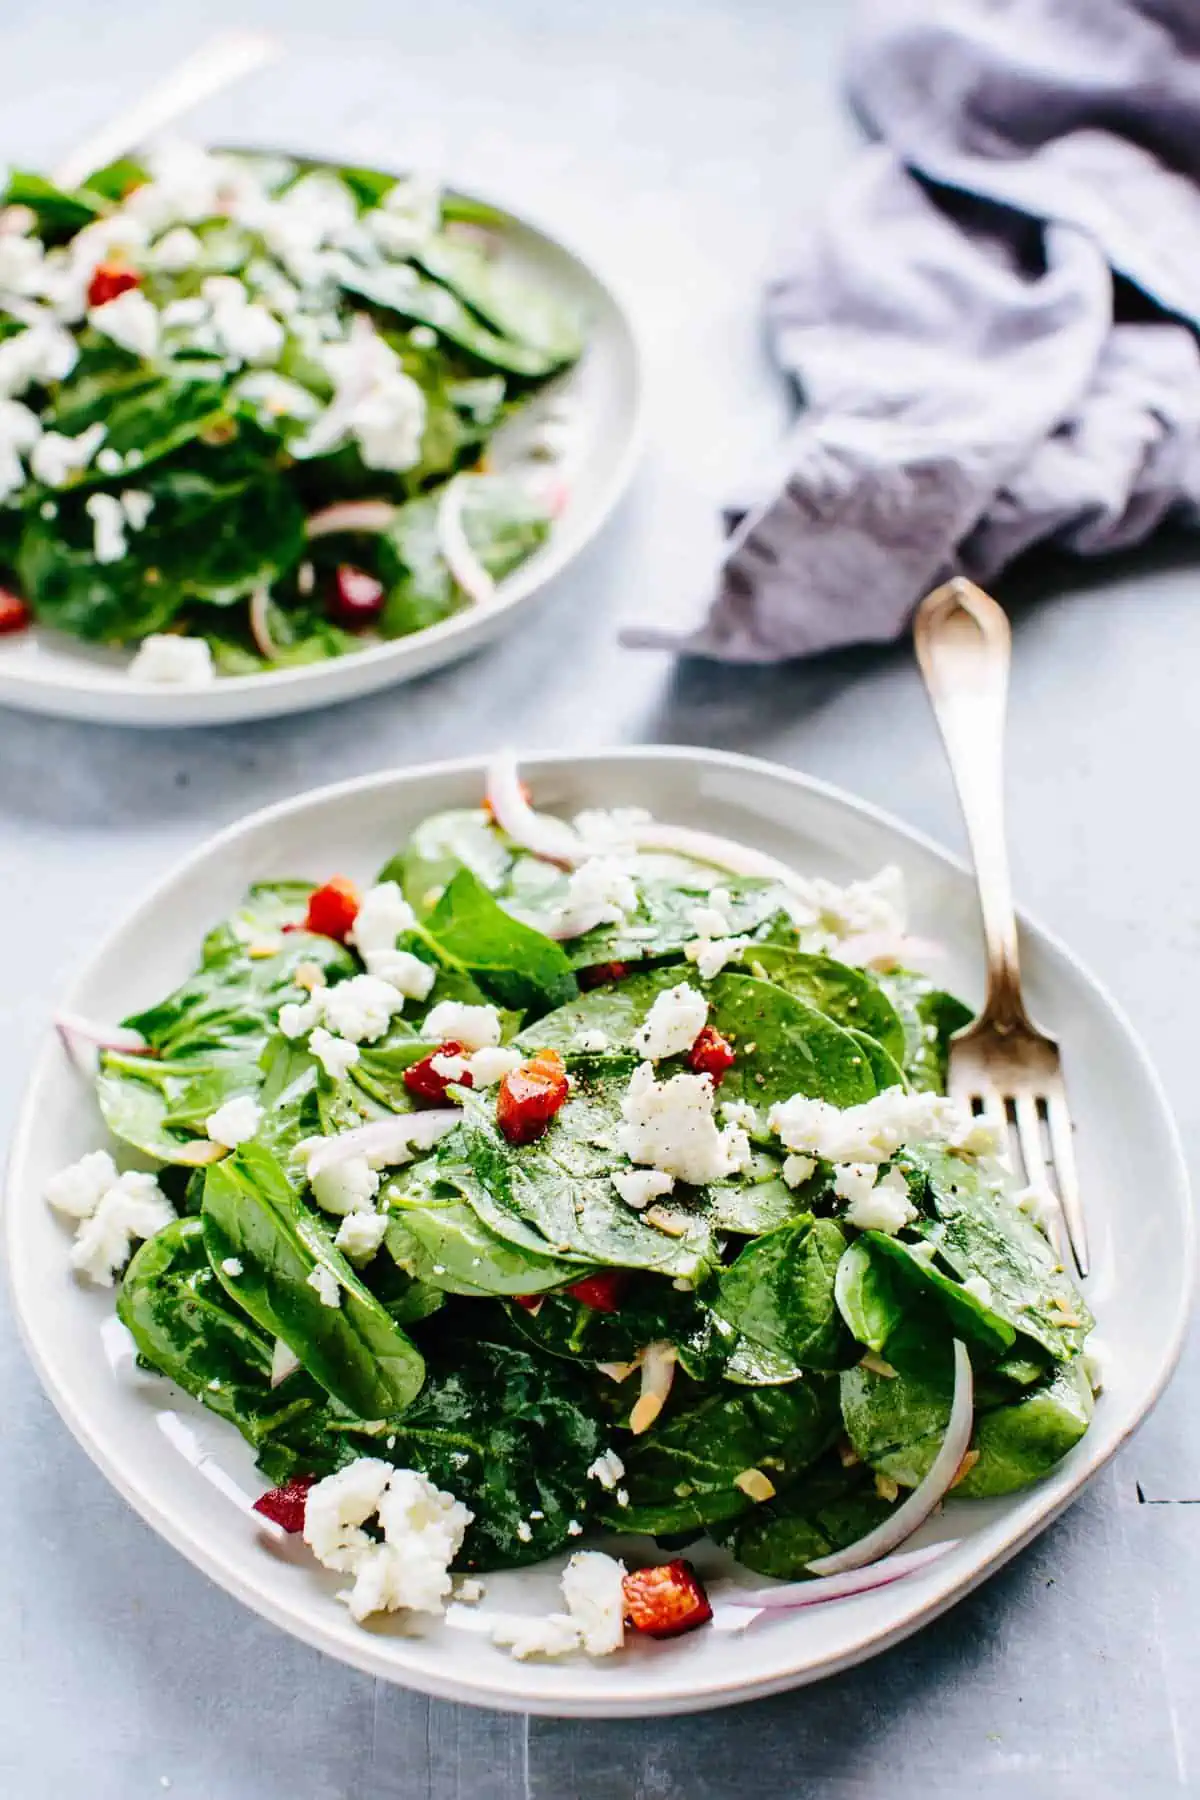 A plate of spinach salad with goat cheese